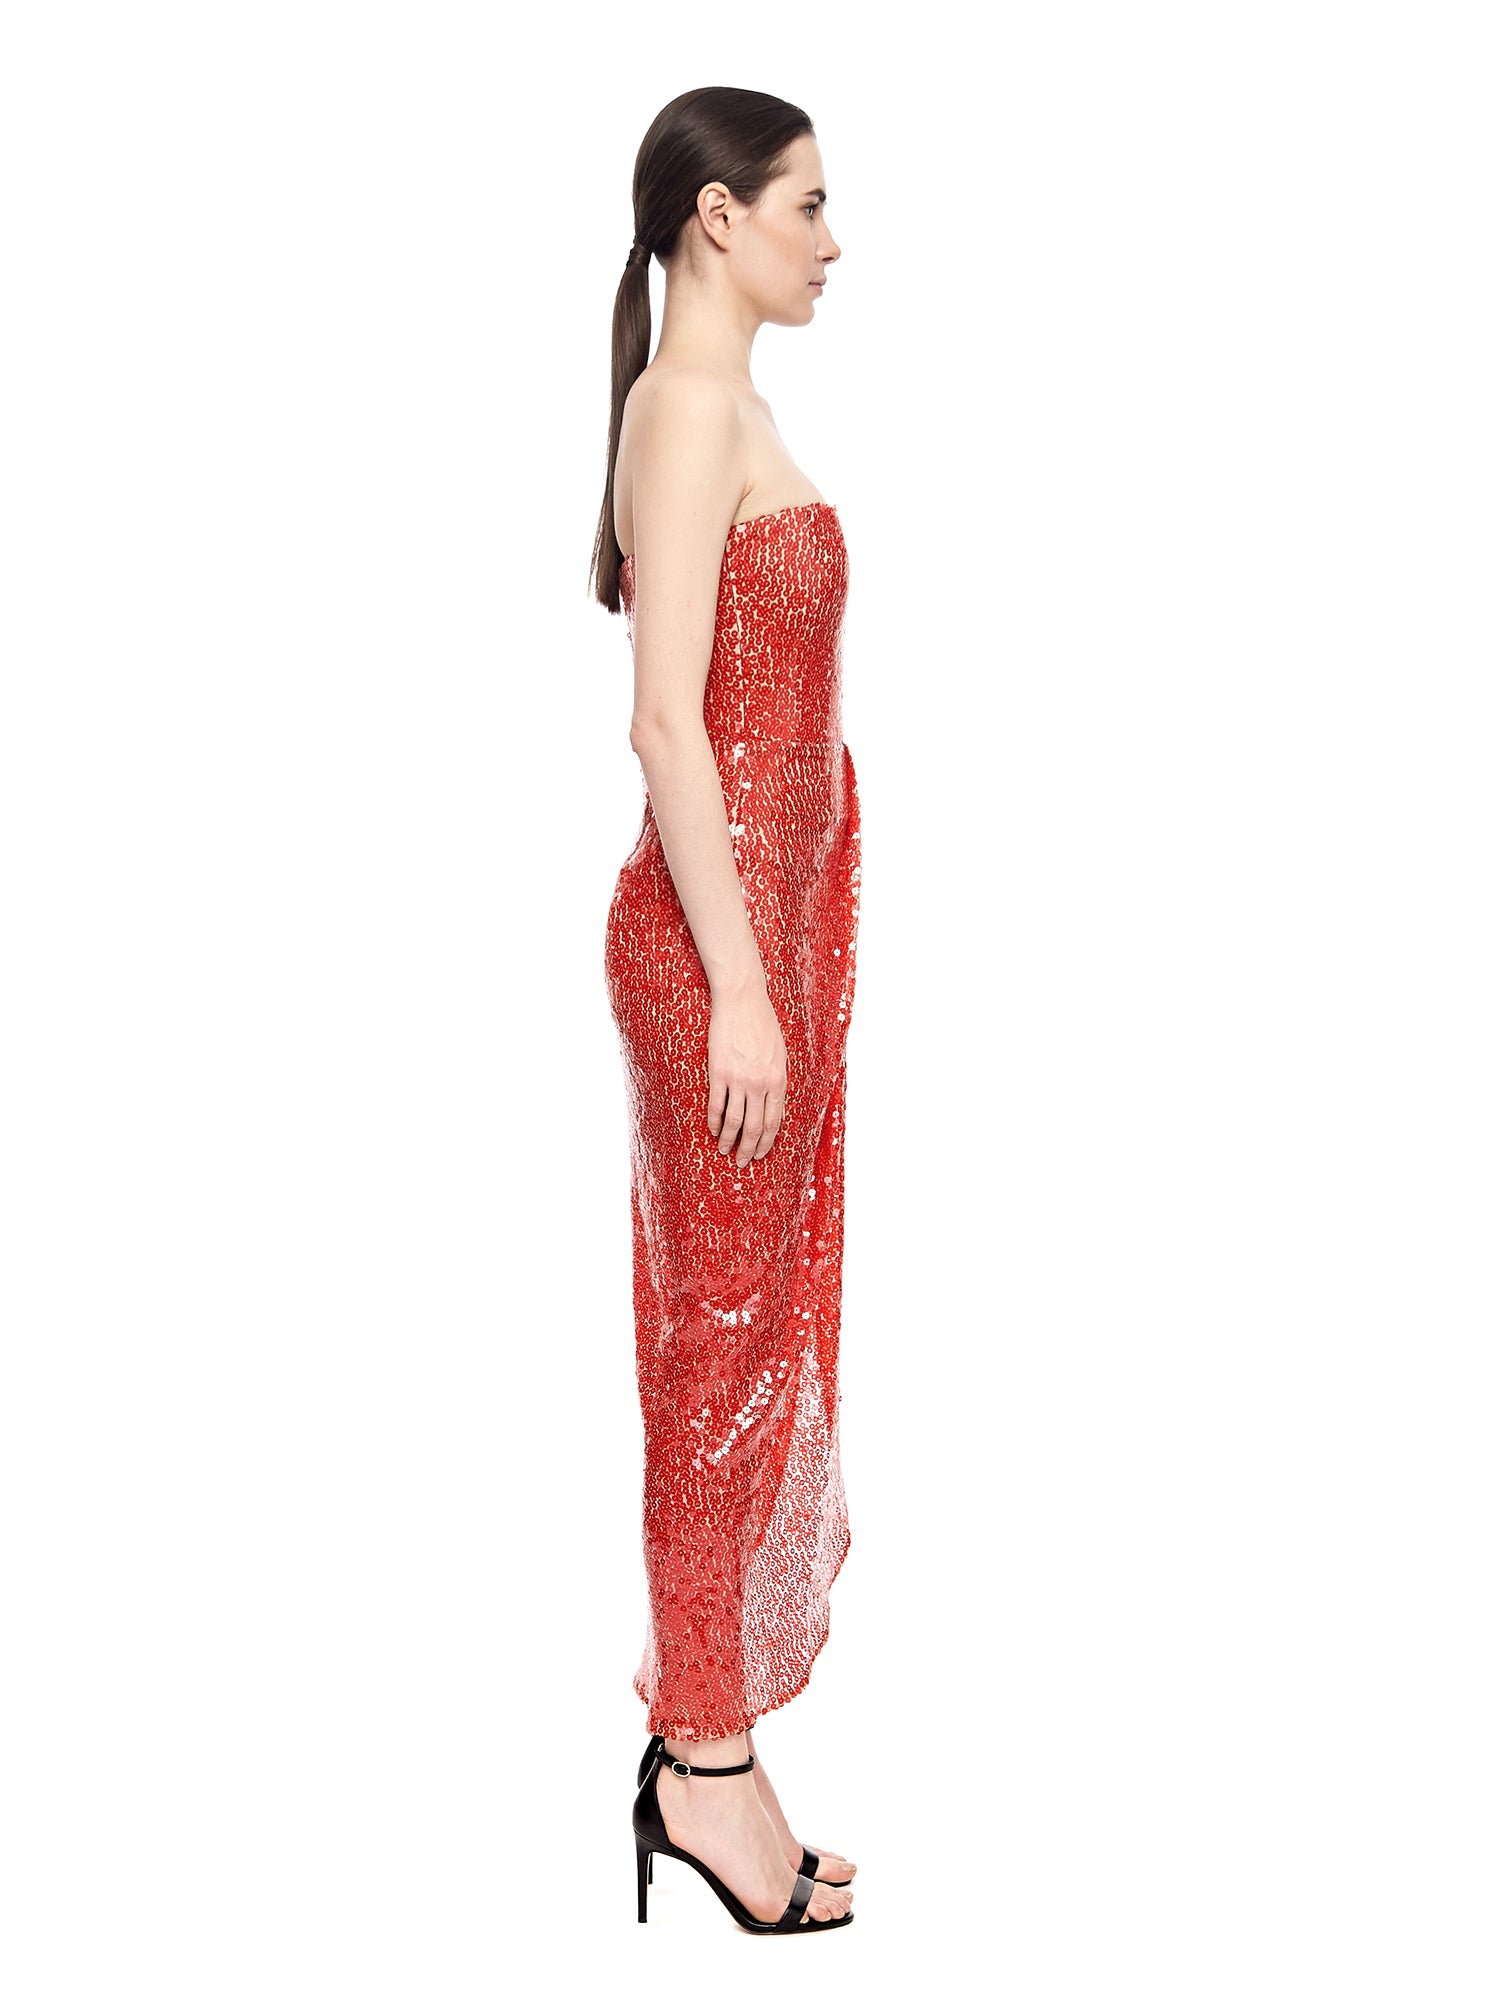 Red Rose Sequined Corset Gown